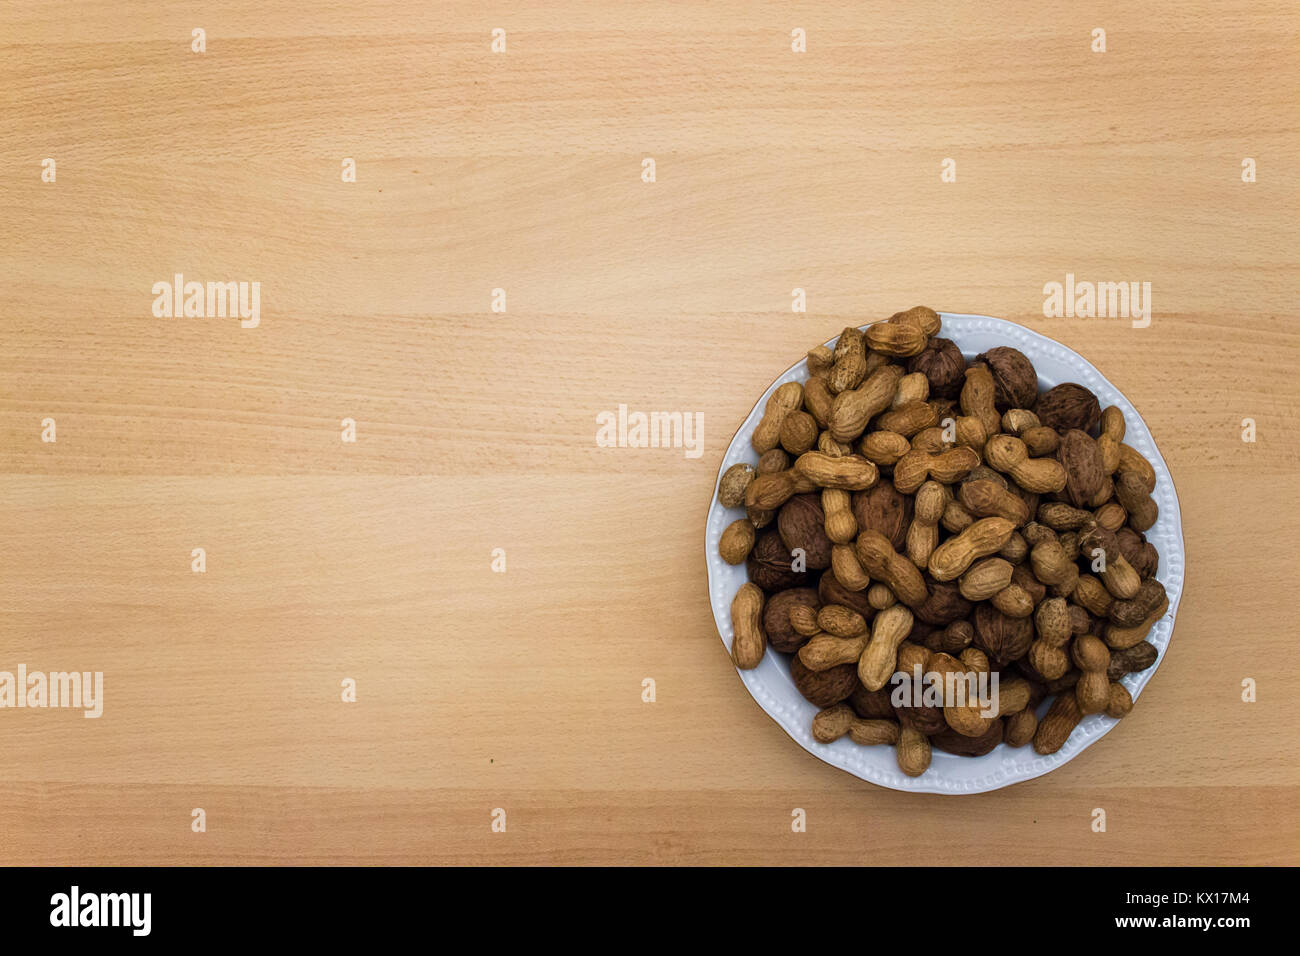 plate of nuts on wooden table with negative space Stock Photo